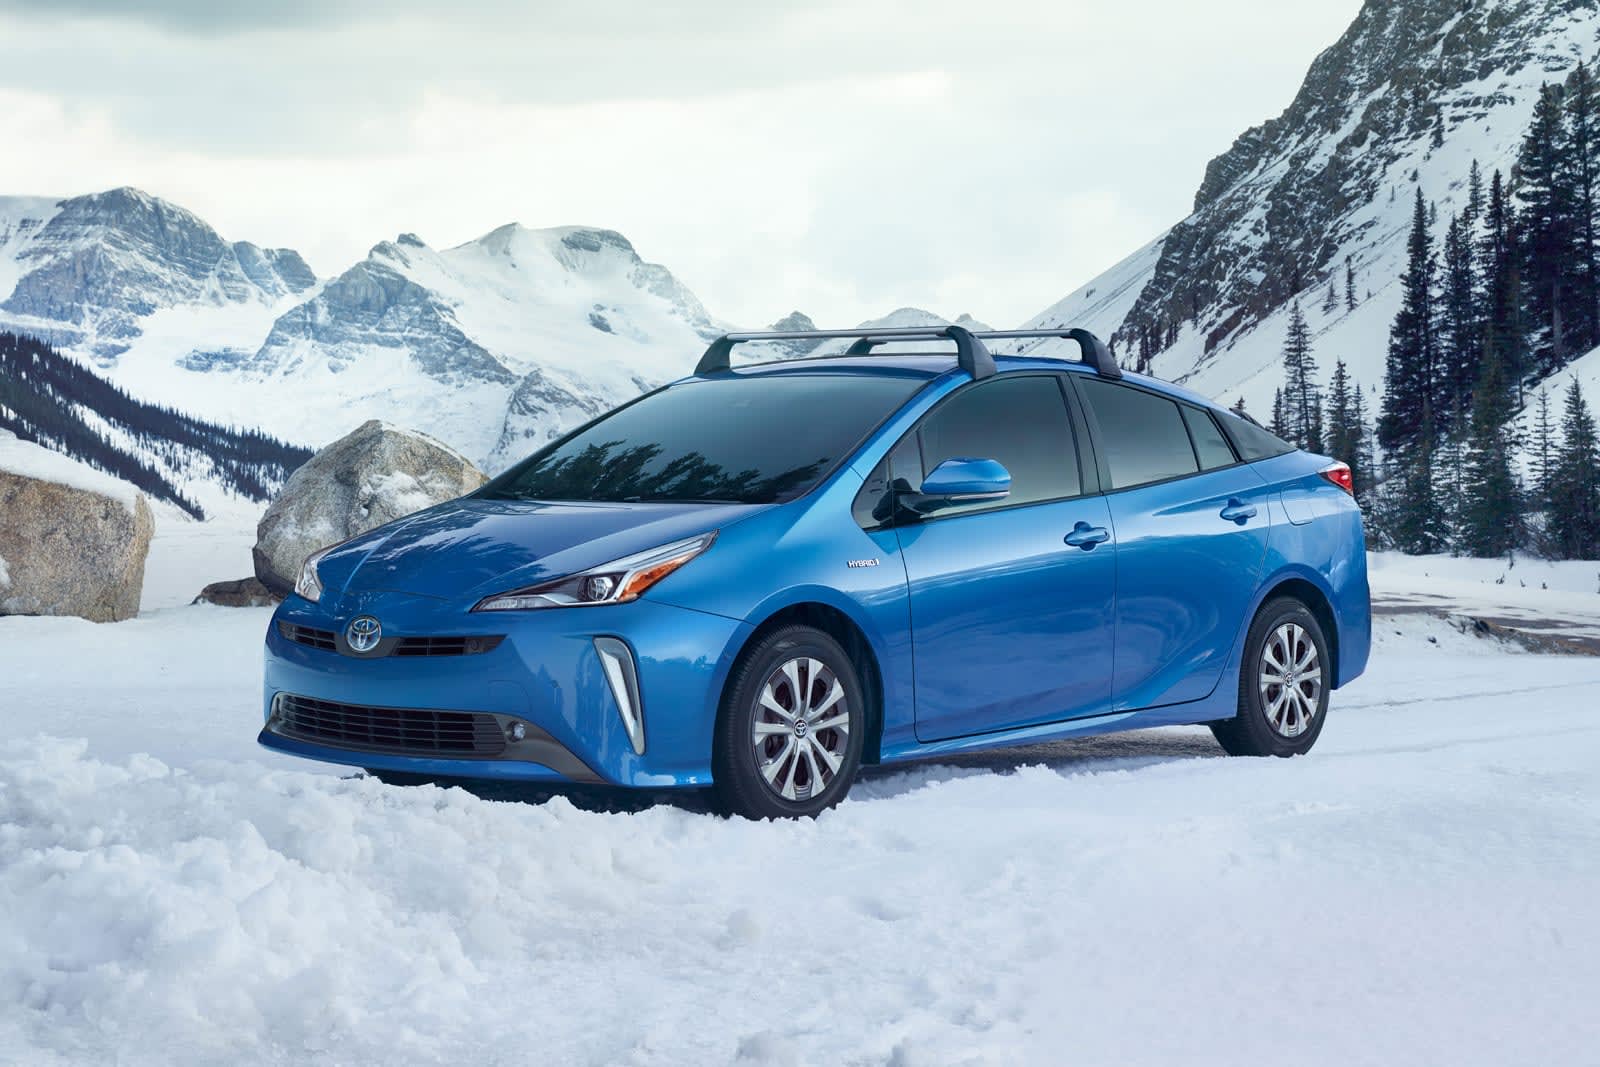 Toyota S 2019 Prius Will Offer Electric All Wheel Drive